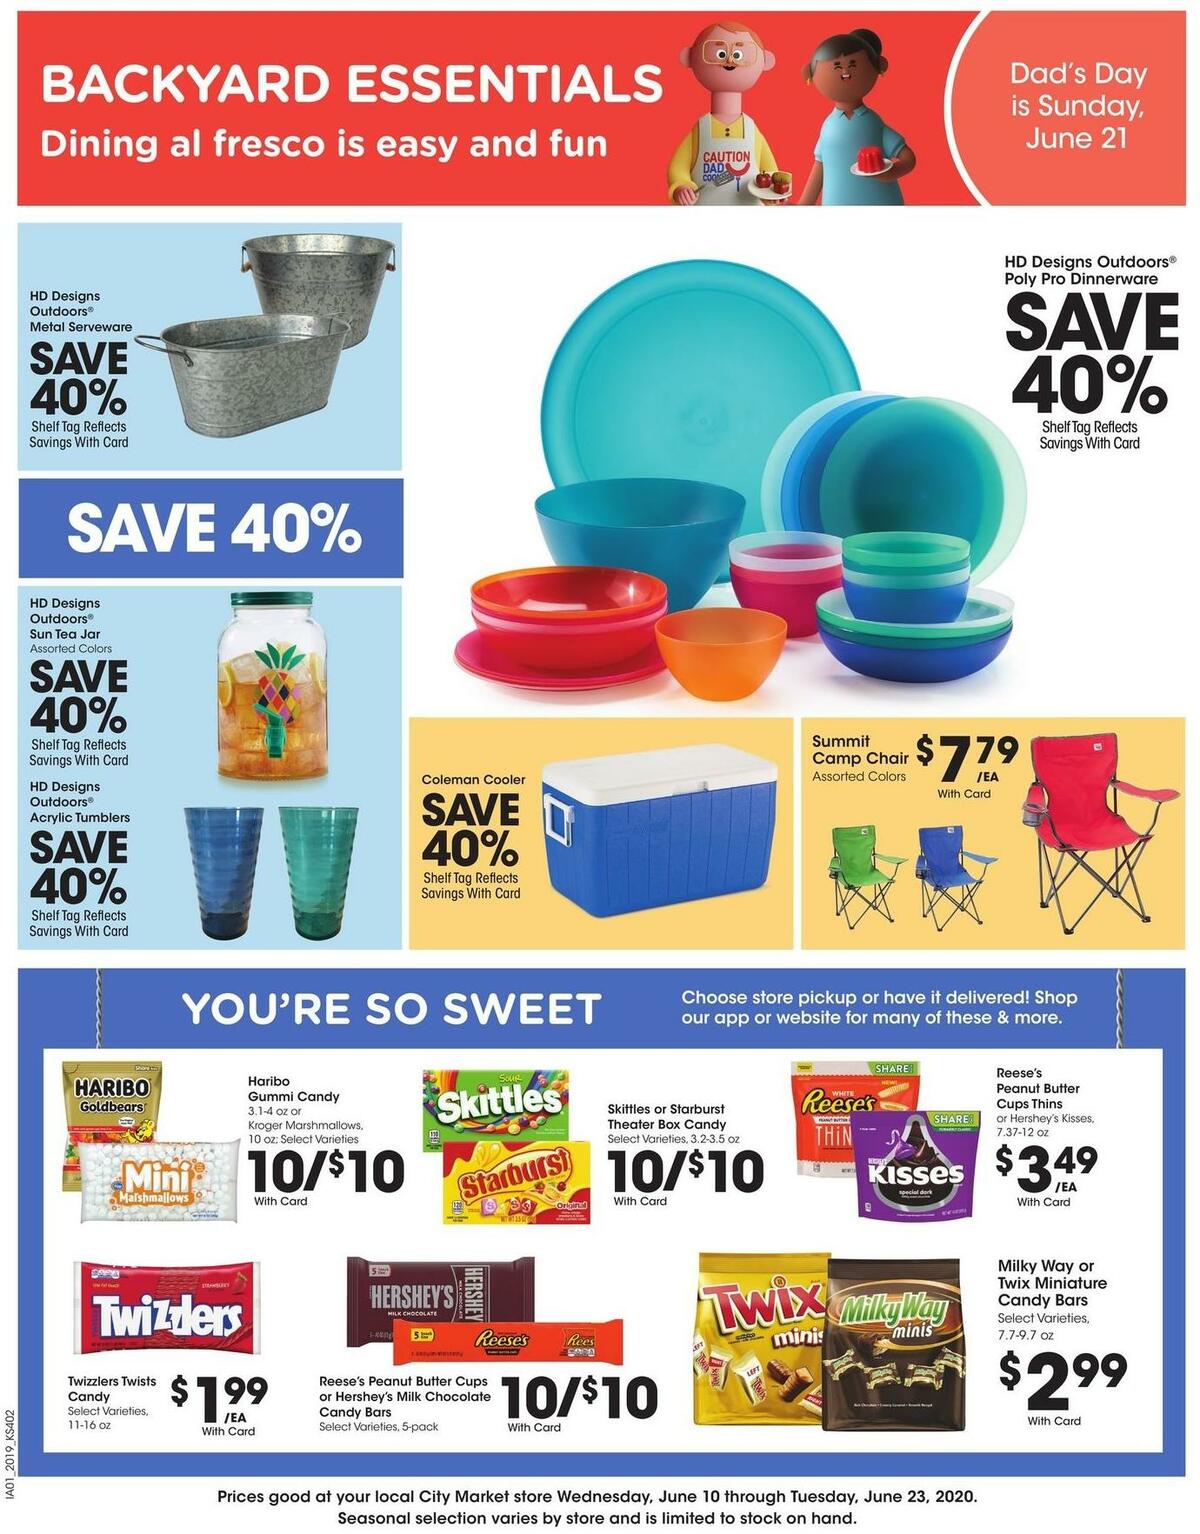 City Market Weekly Ad from June 10